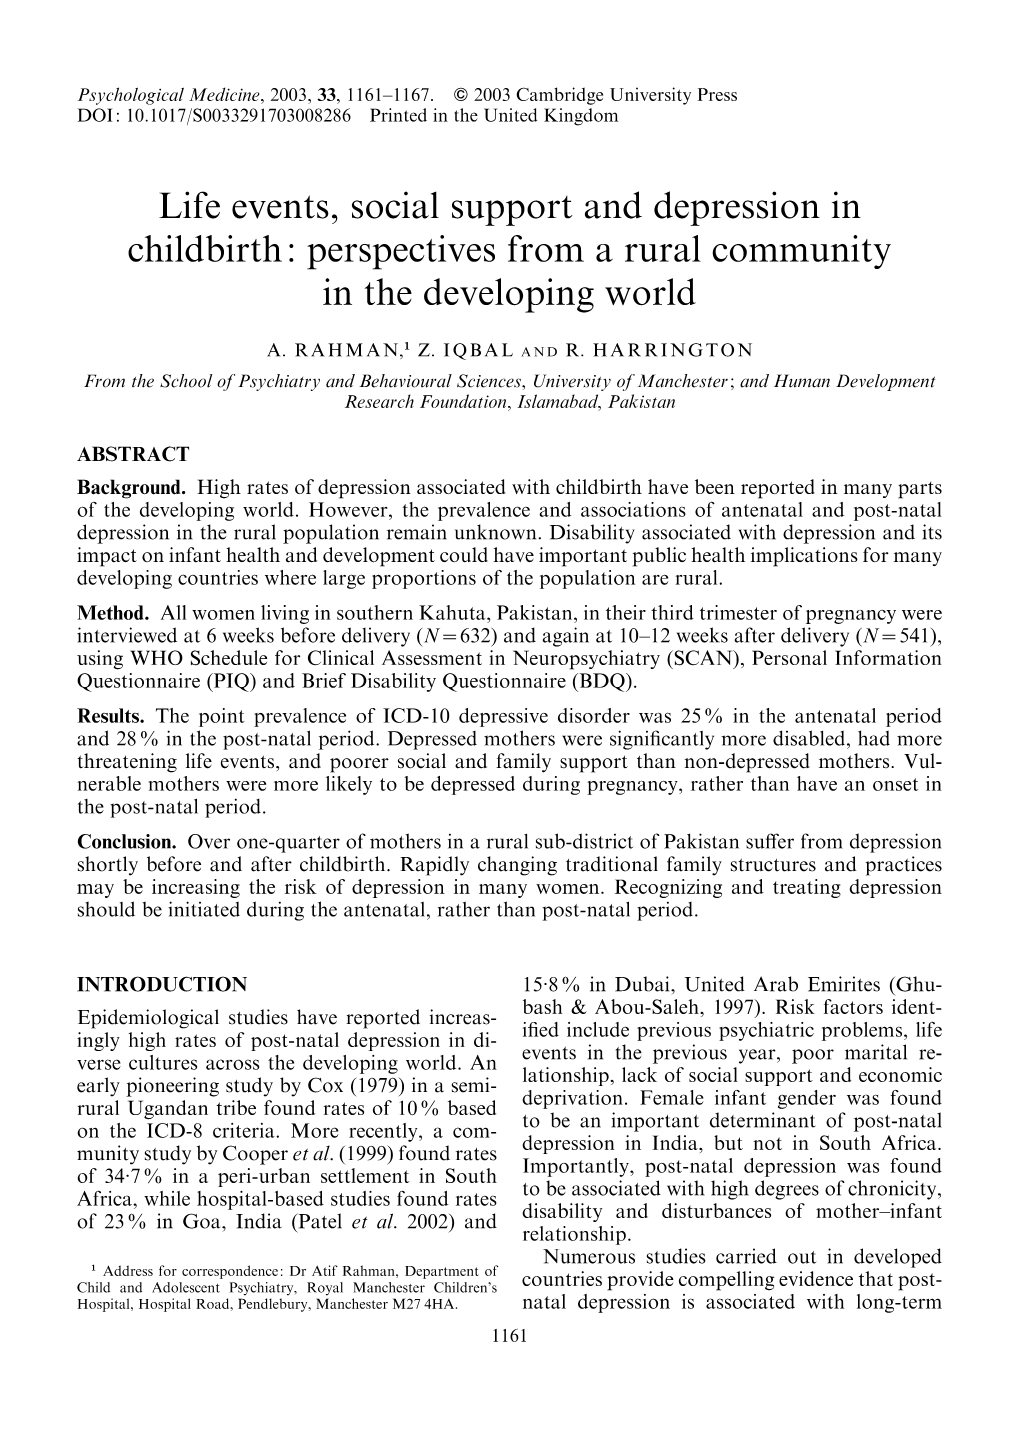 Life Events, Social Support and Depression in Childbirth: Perspectives from a Rural Community in the Developing World